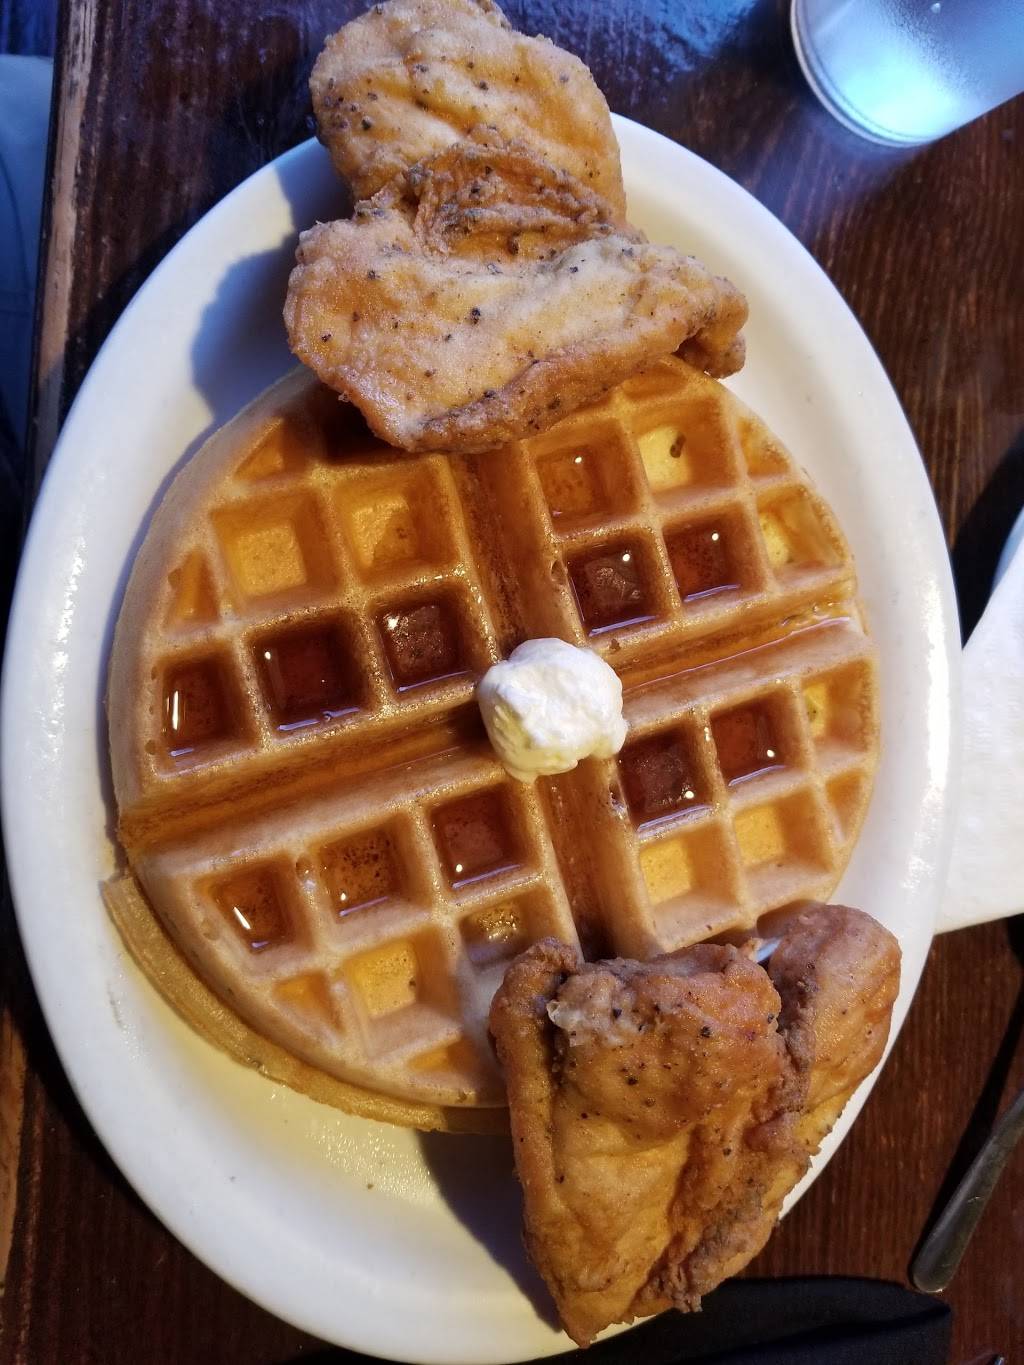 Kikis Chicken and Waffles | restaurant | 7001 Parklane Rd, Columbia, SC 29223, USA | 8036995422 OR +1 803-699-5422